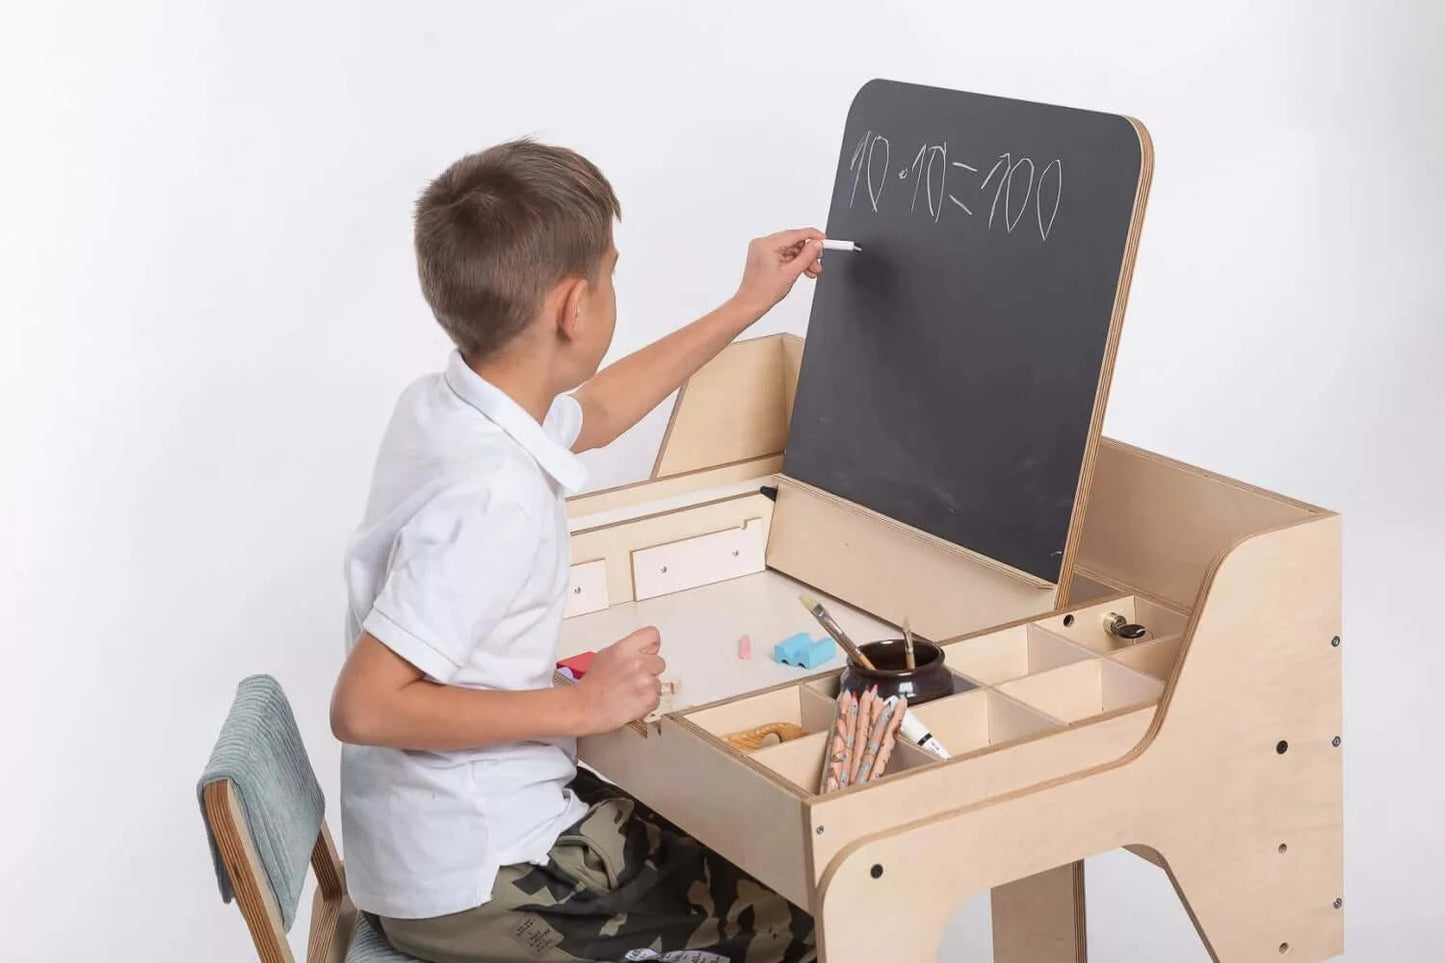 Montessori writing and drawing table "Ina"